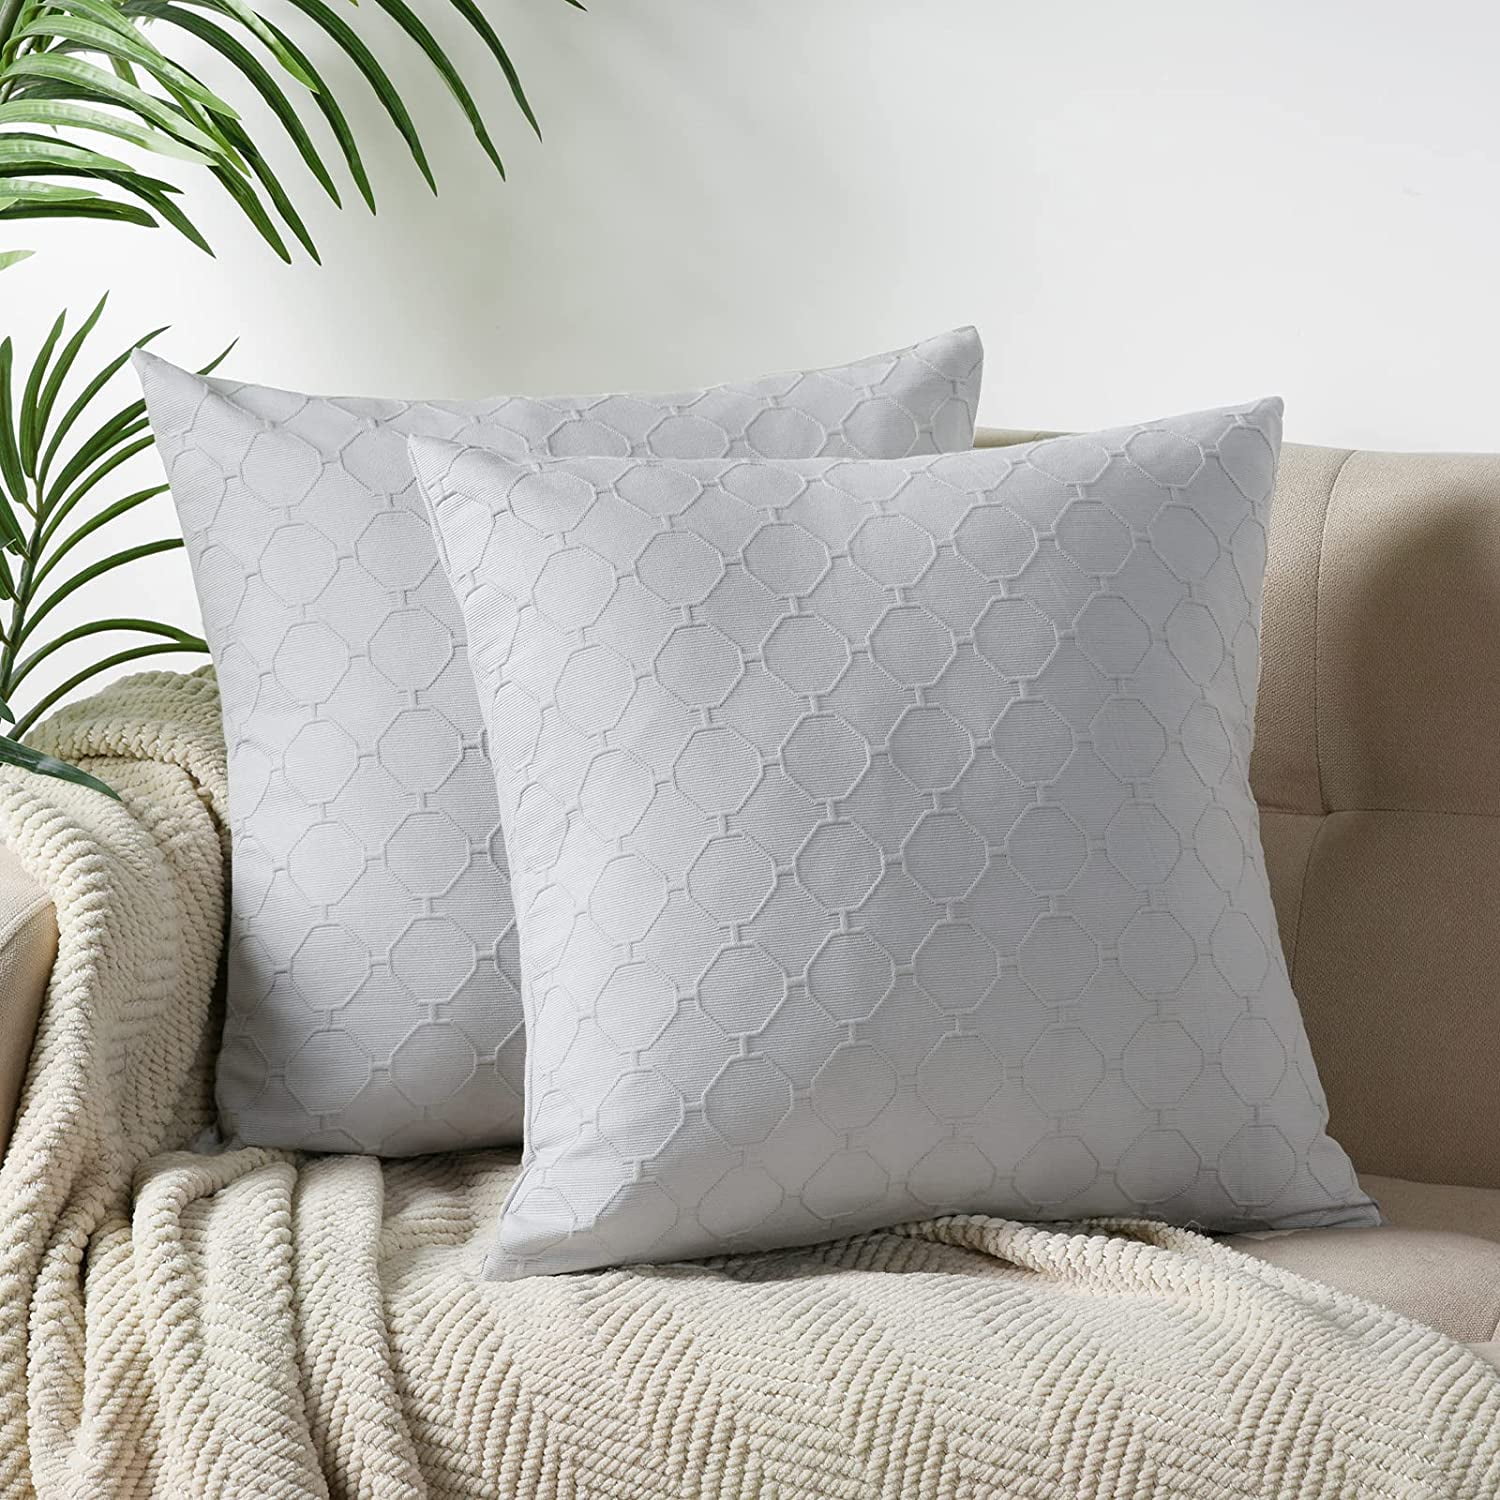 BEACH HOUSE COTTON MATELASSE QUILTED PILLOW COVER WHITE SHELL STANDARD SHAM 